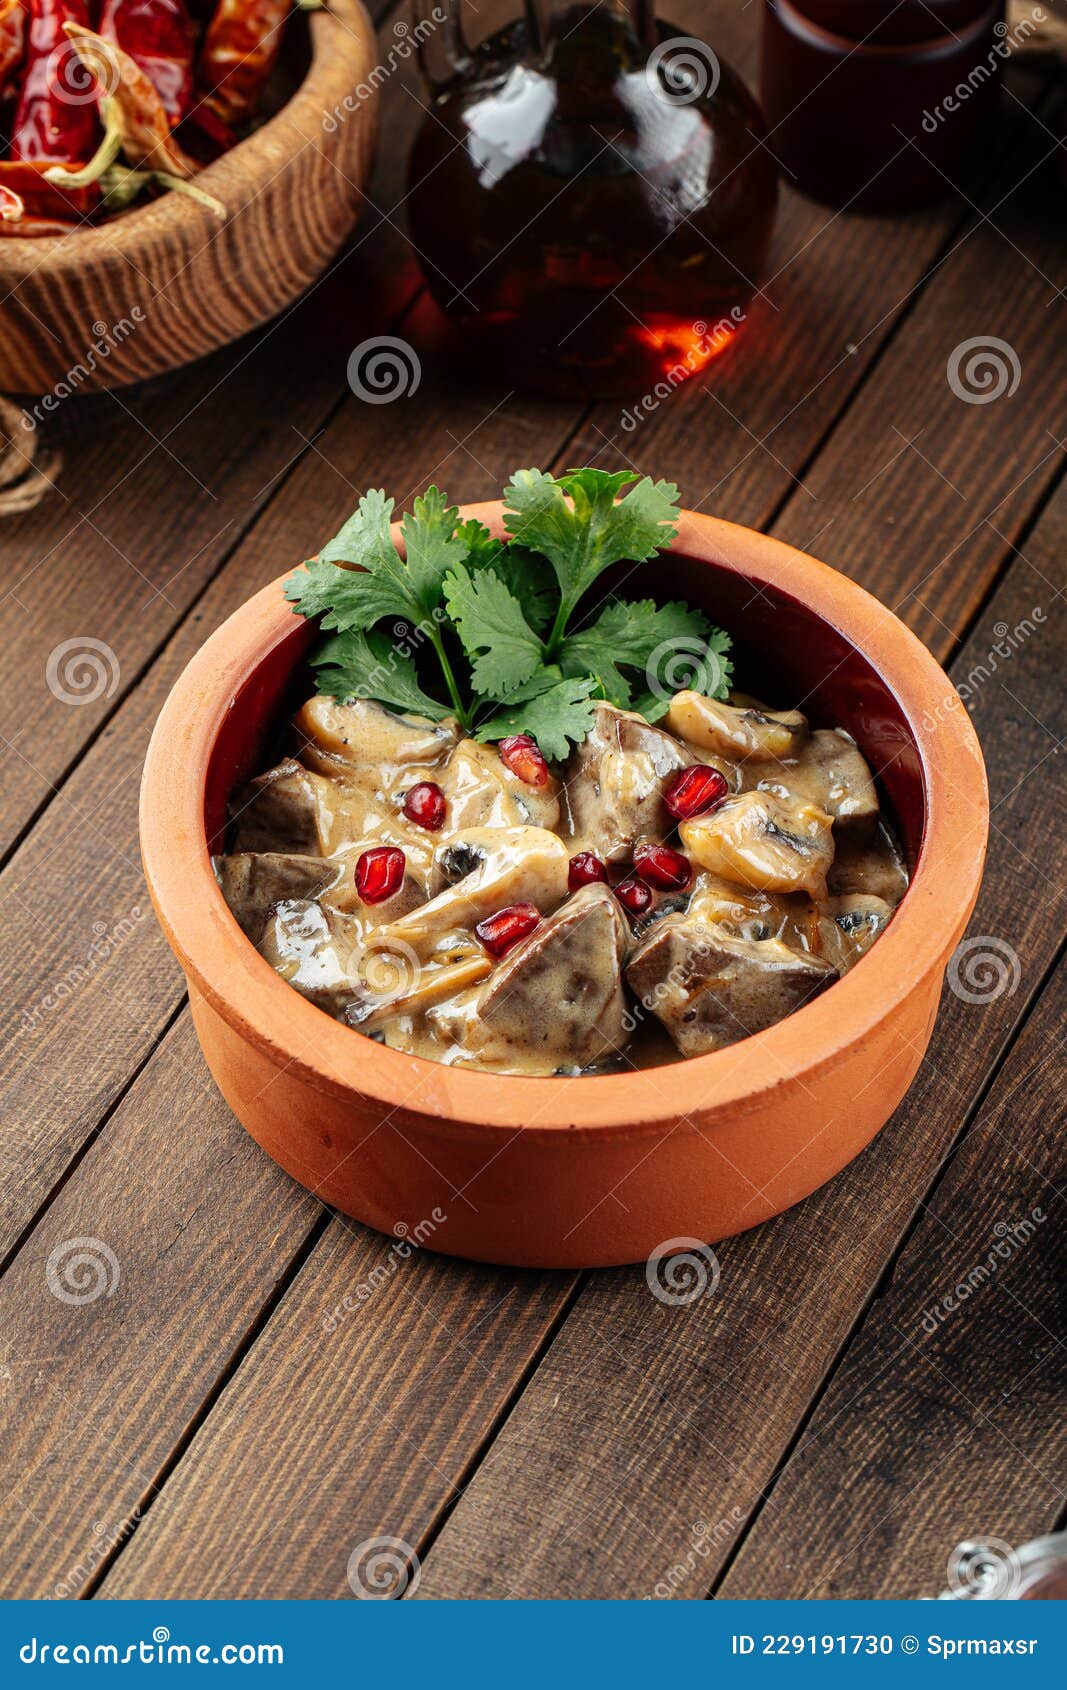 Georgian with Liver and Mushrooms in a Clay Pot Stock Photo - Image of ...